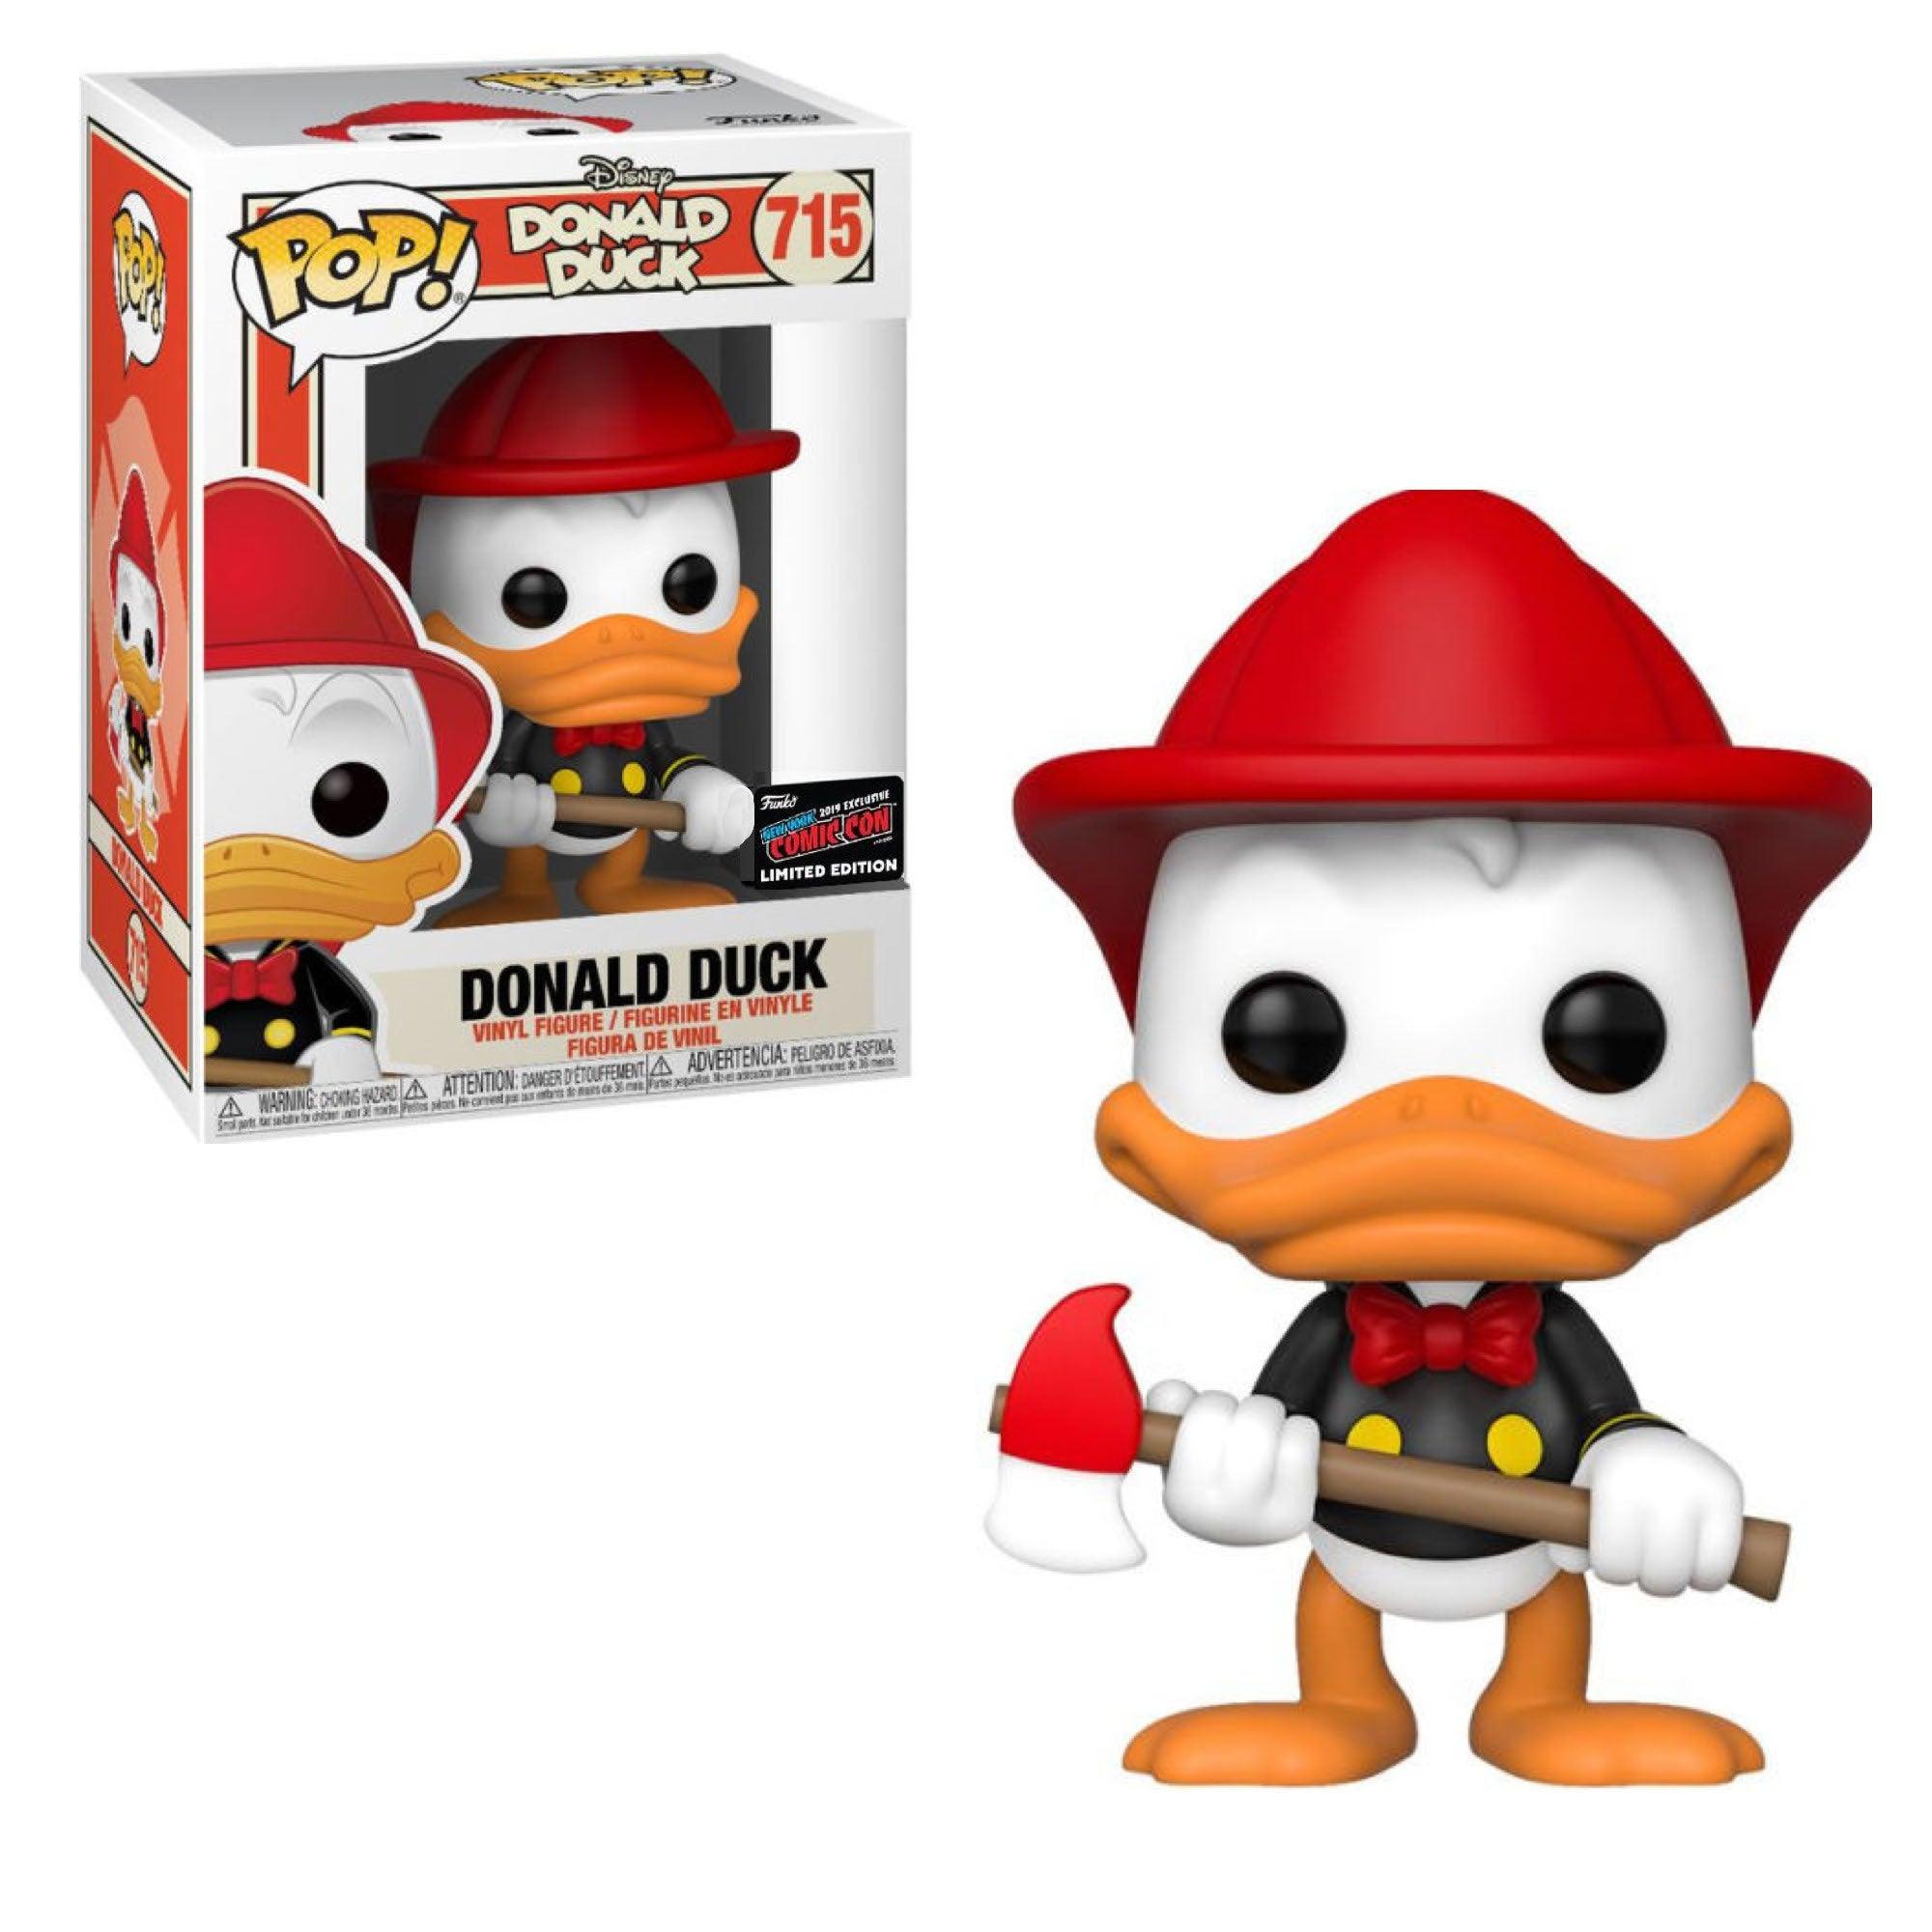 Pop! Disney - Donald Duck - #715 - EXCLUSIVE 2019 New York Comic Con LIMITED Edition - Hobby Champion Inc